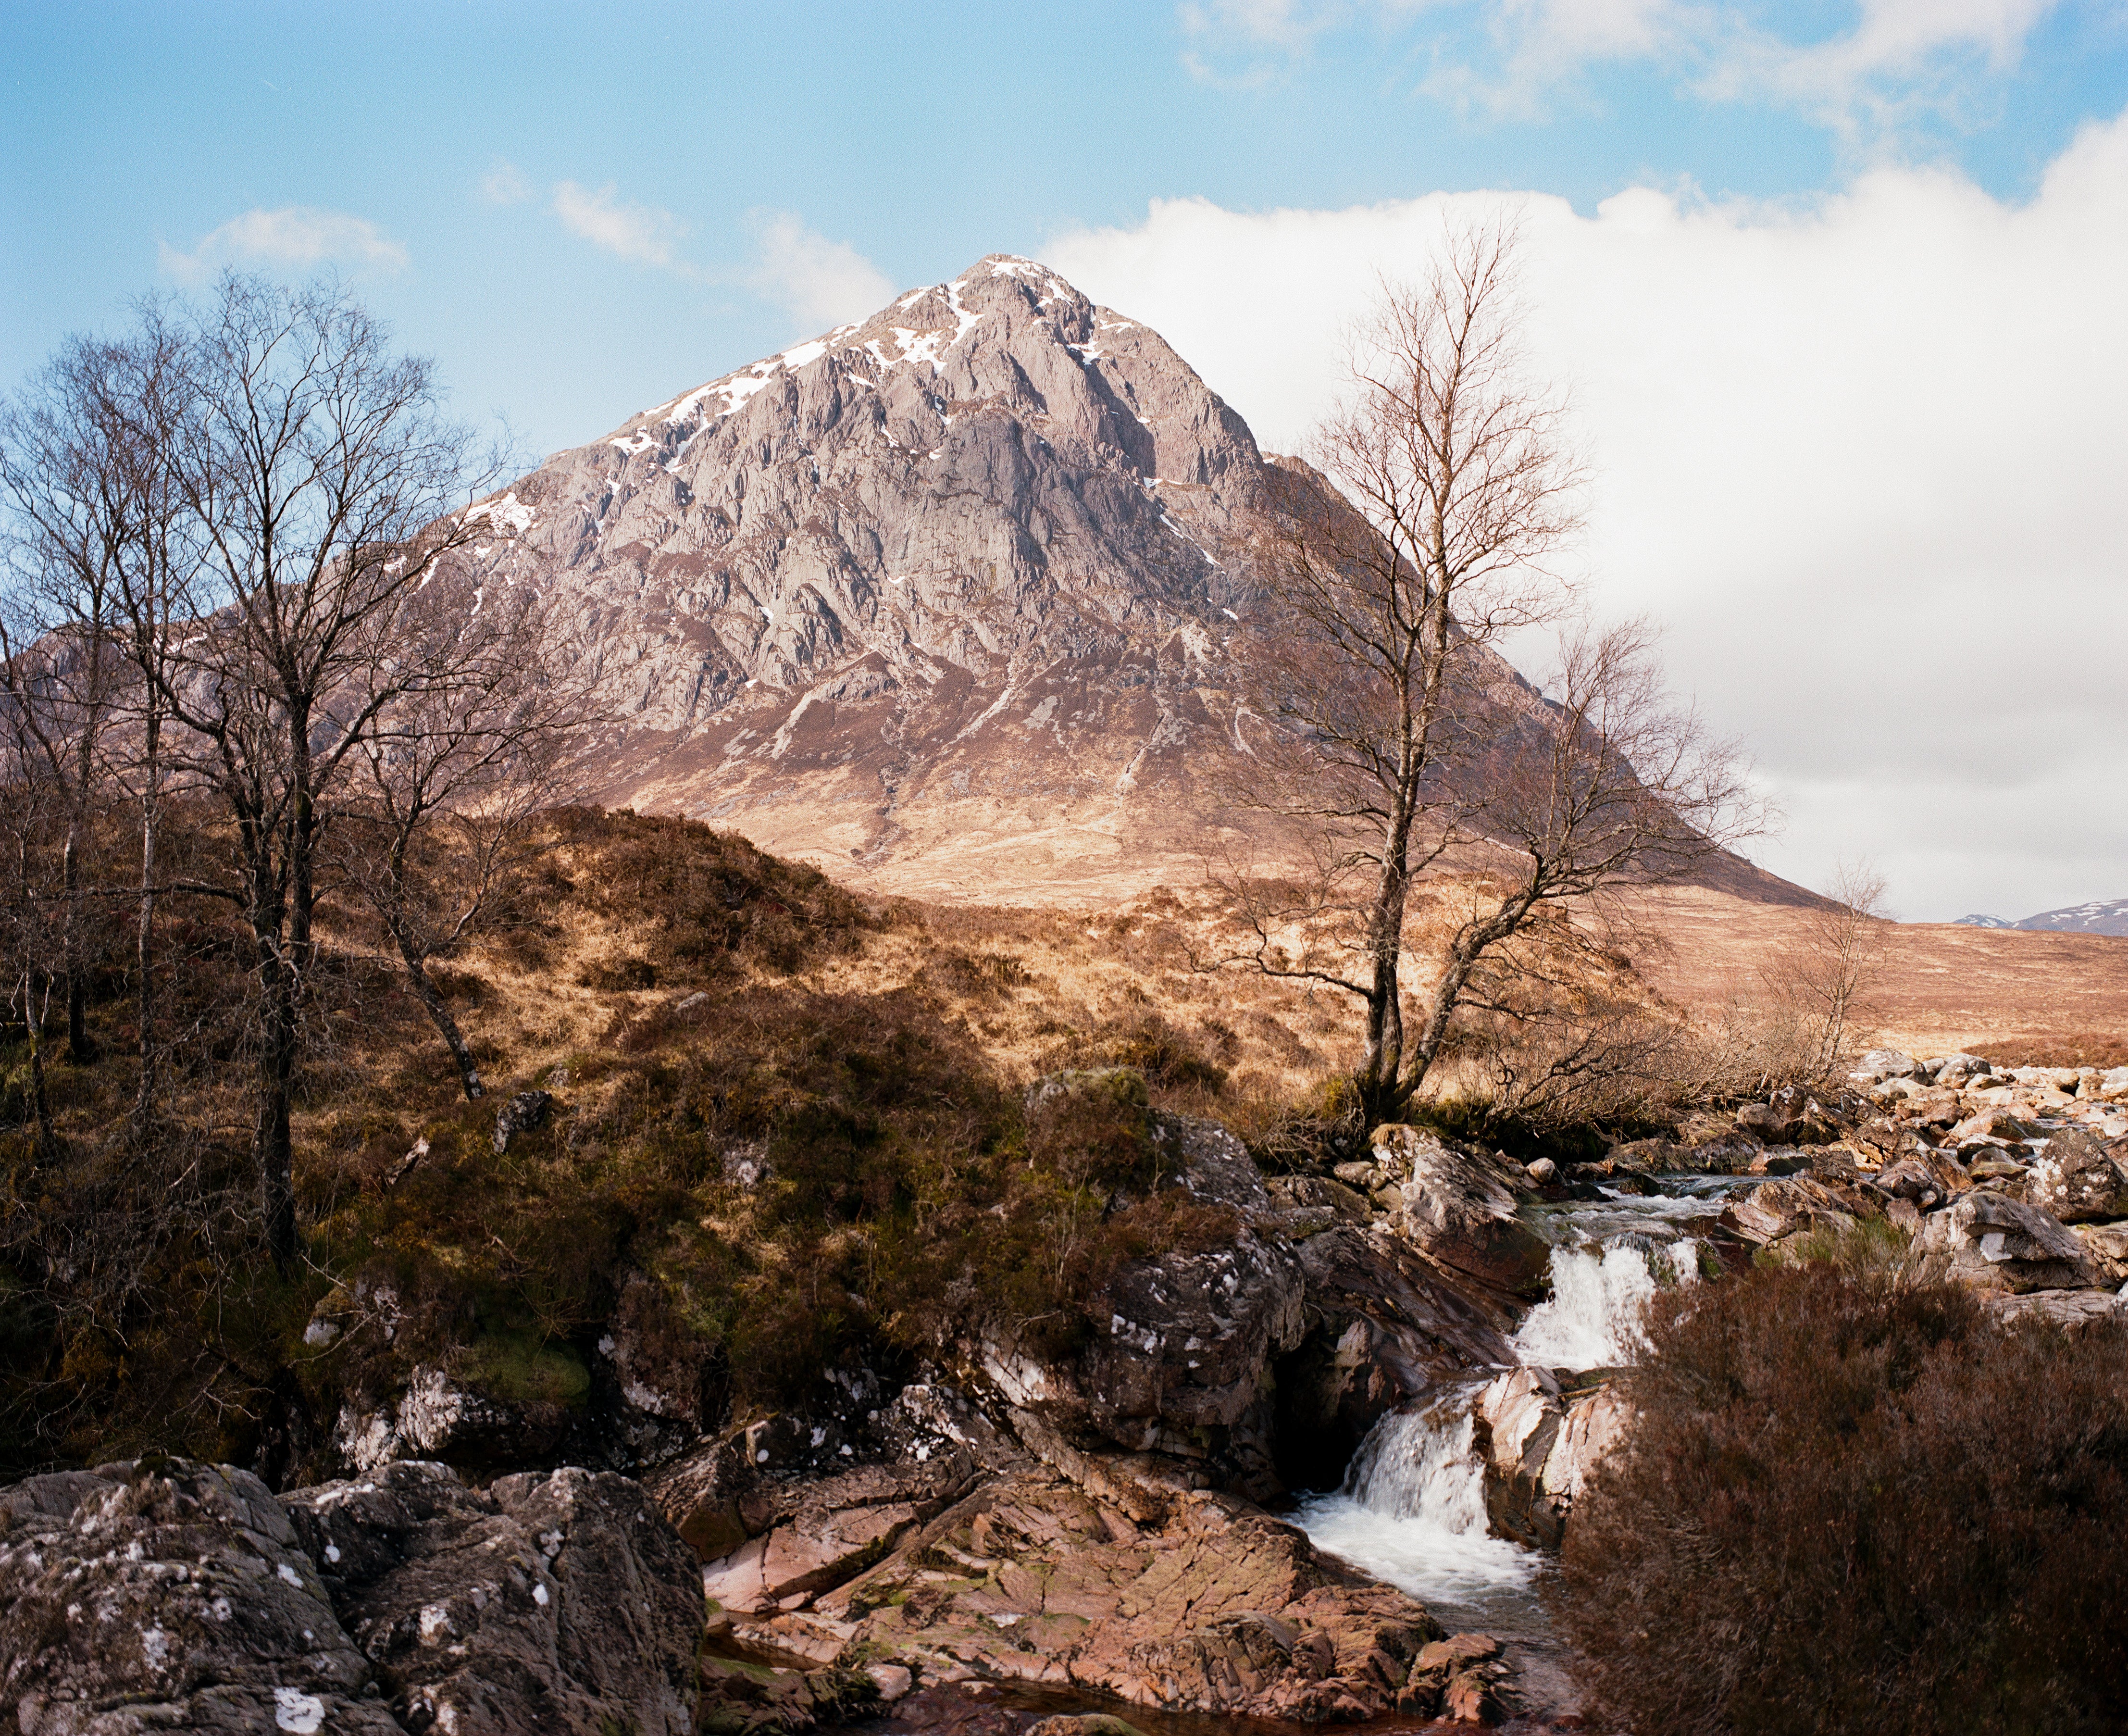 Buchaille Etive Mor Glencoe photograph of landscape with rocks and mountain in background